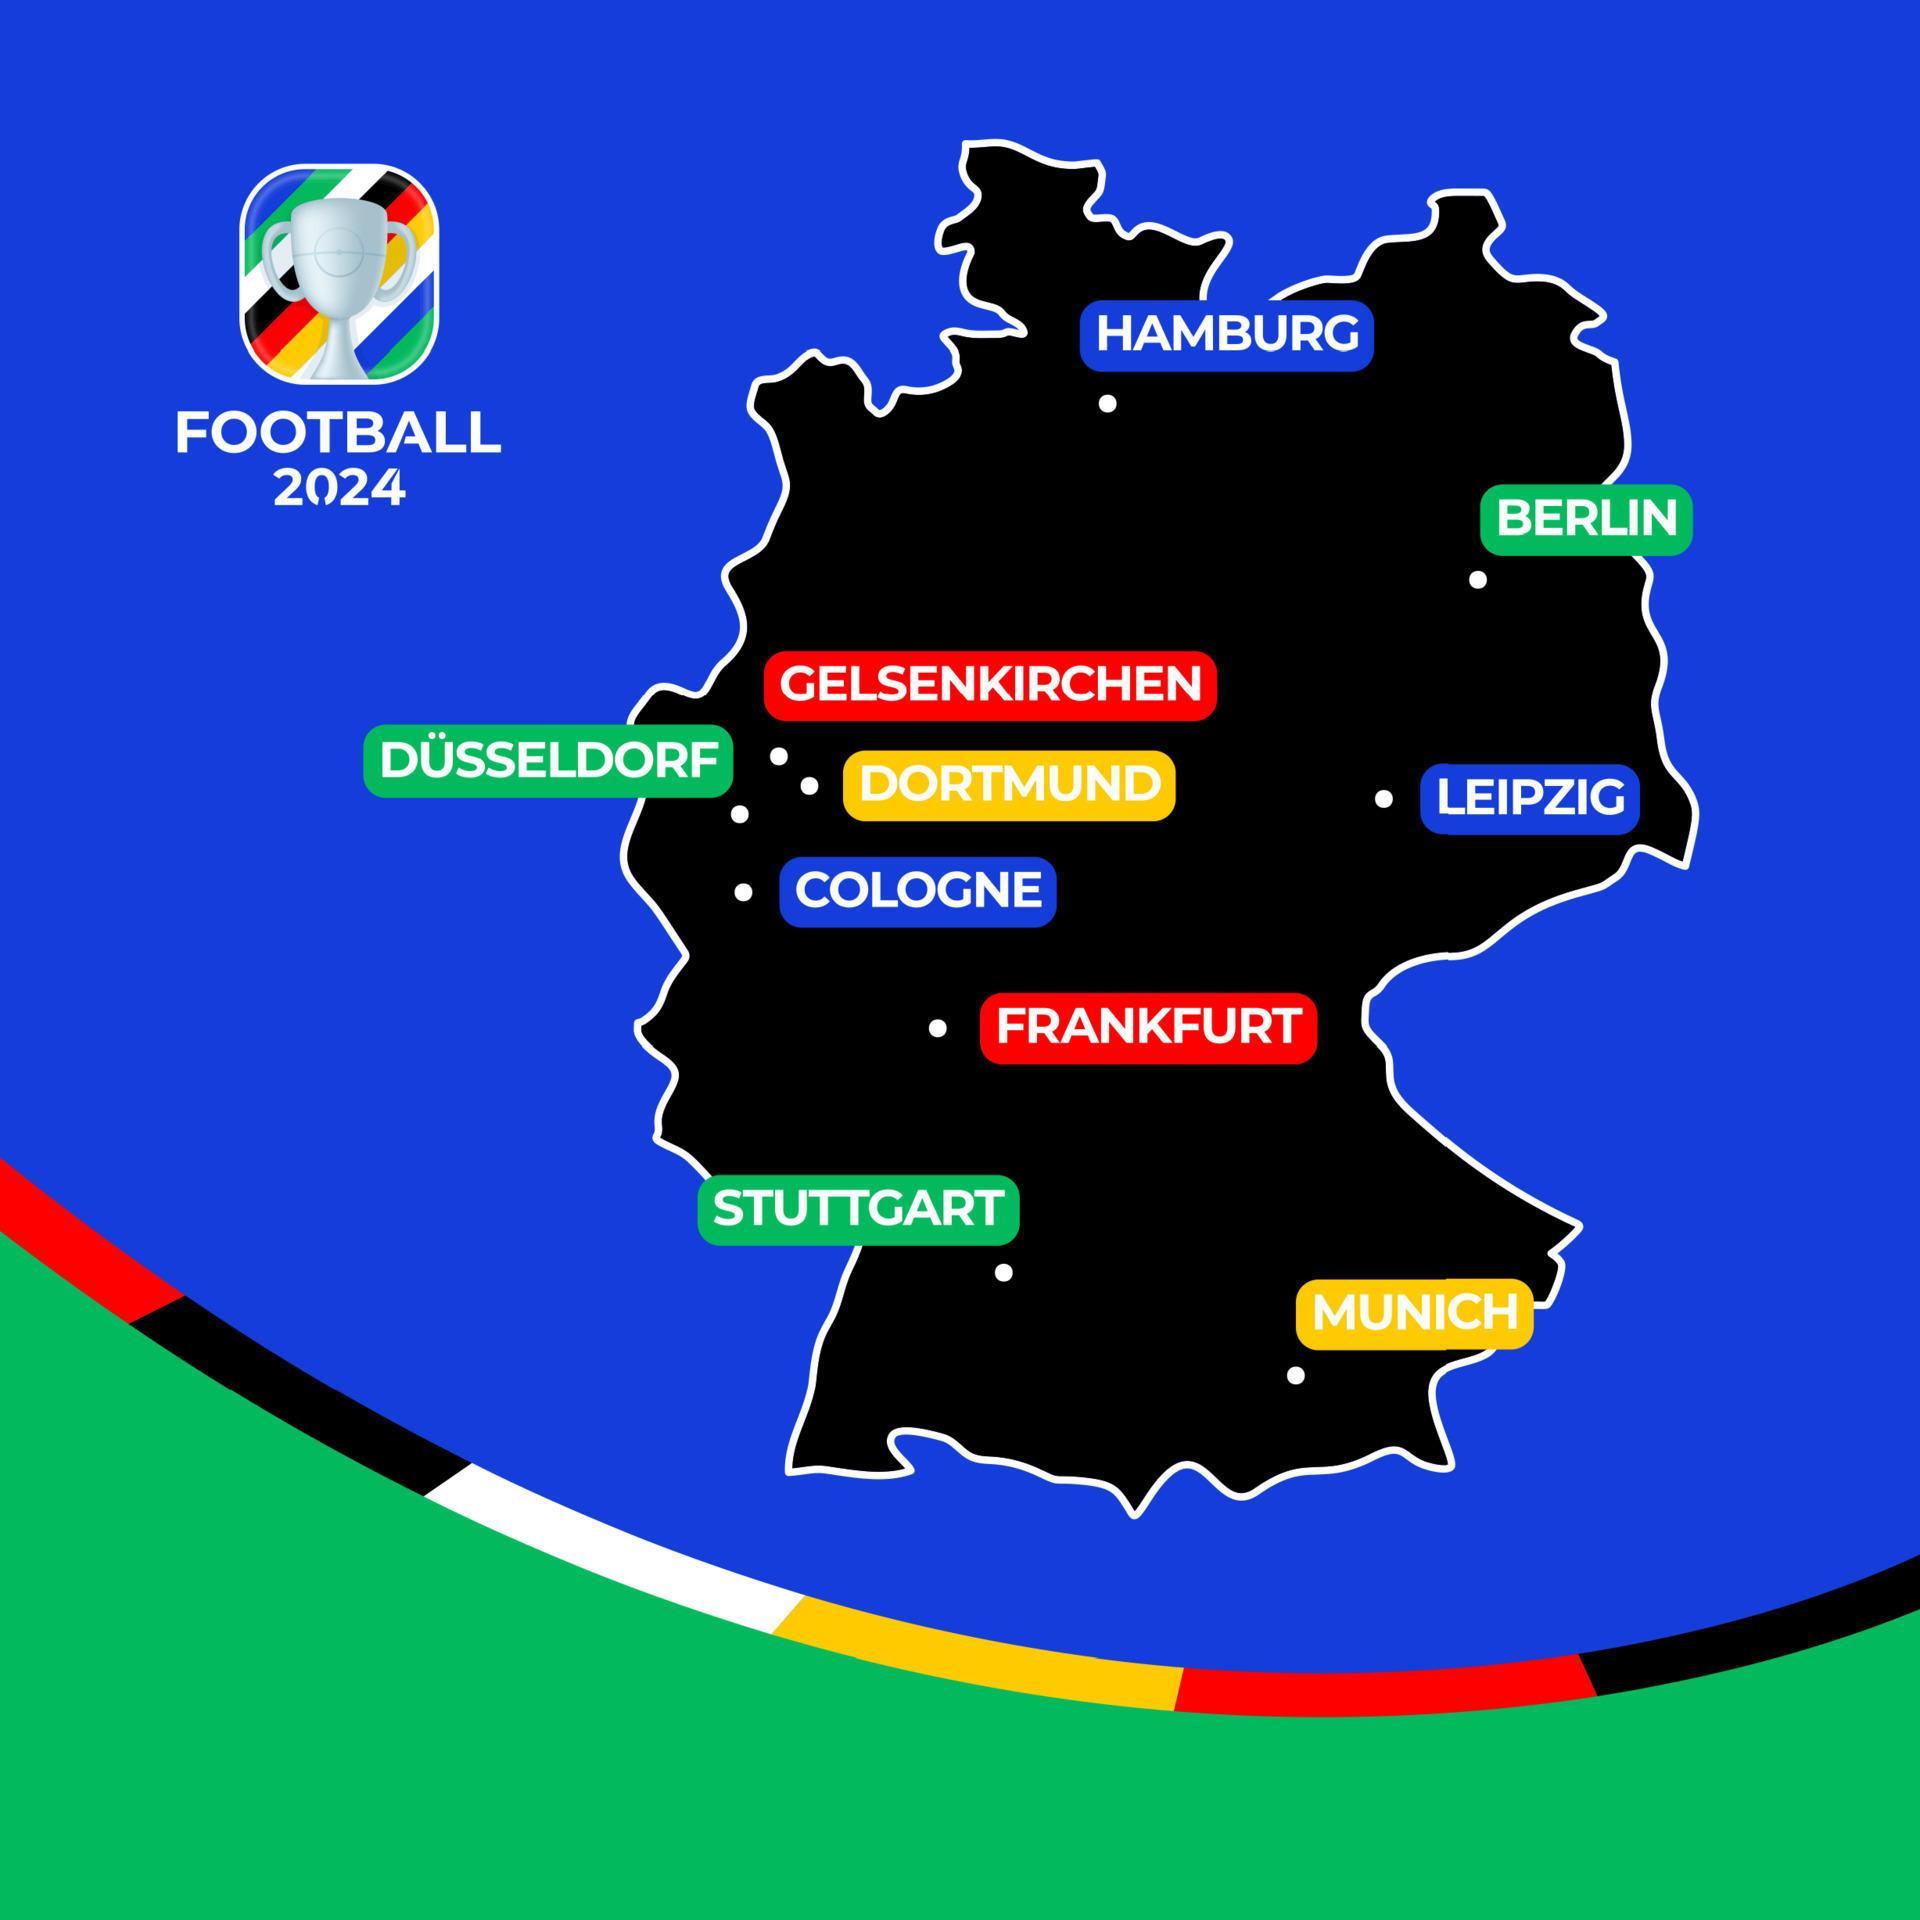 Football 2024 host cities. Vector map of Germany with cities hosting